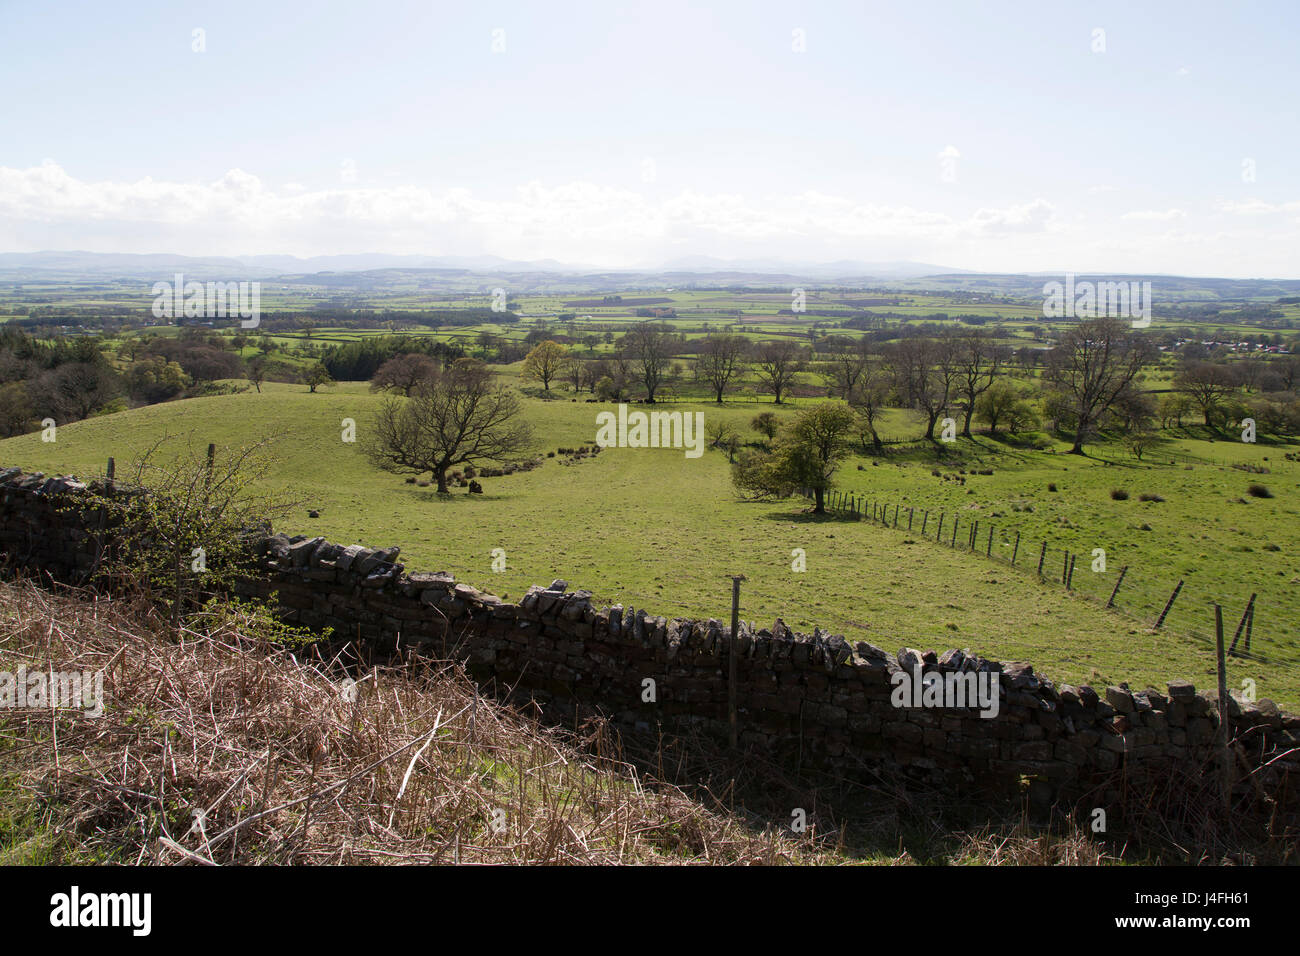 A dry stone wall runs through countryside seen from Hartside Pass in Cumbria, England. Hartside Pass rises across the Pennines into Northumberland. Stock Photo